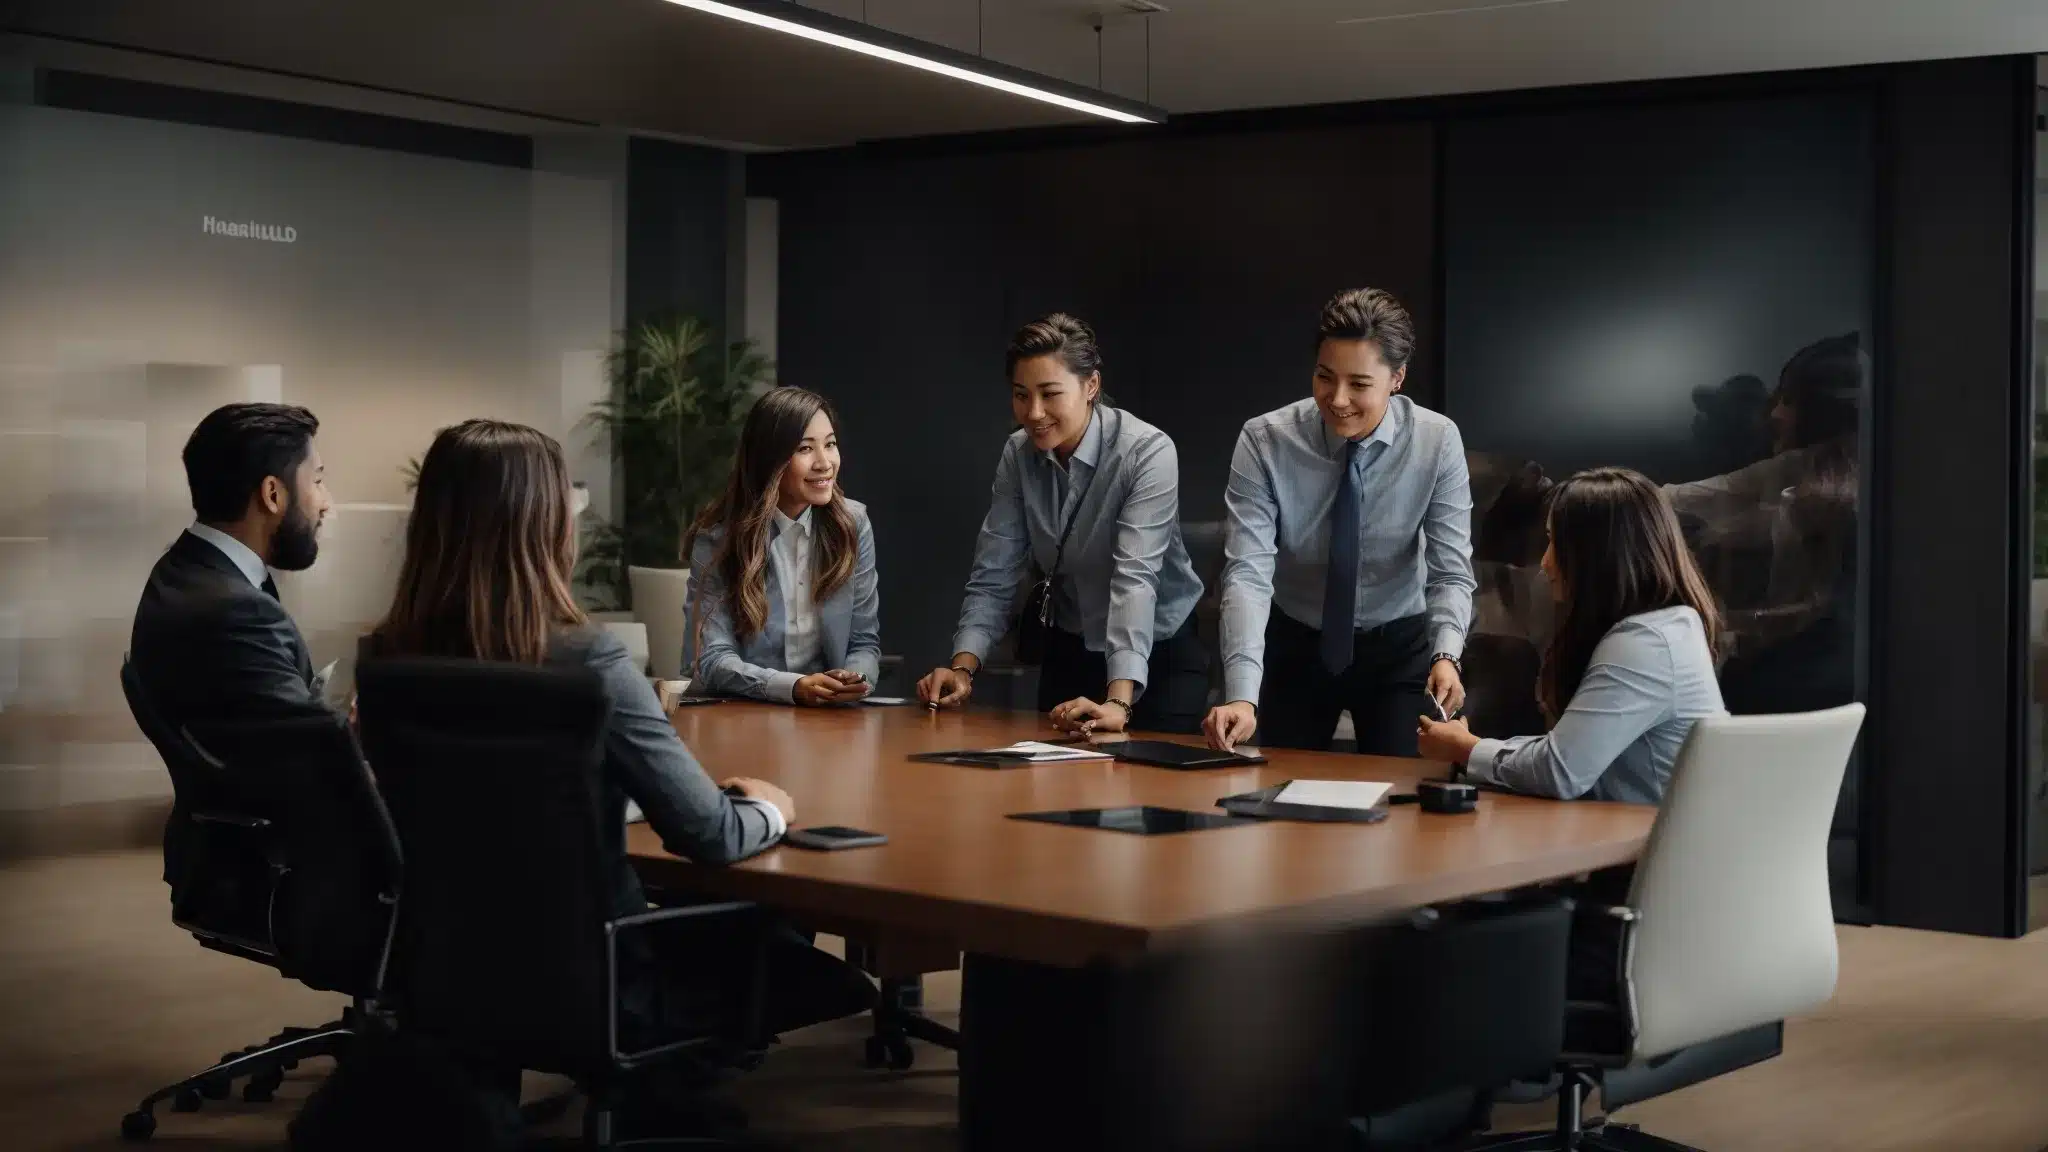 A Marketing Team Enthusiastically Discusses Tactics Around A Boardroom Table With Brand Visuals On Display.